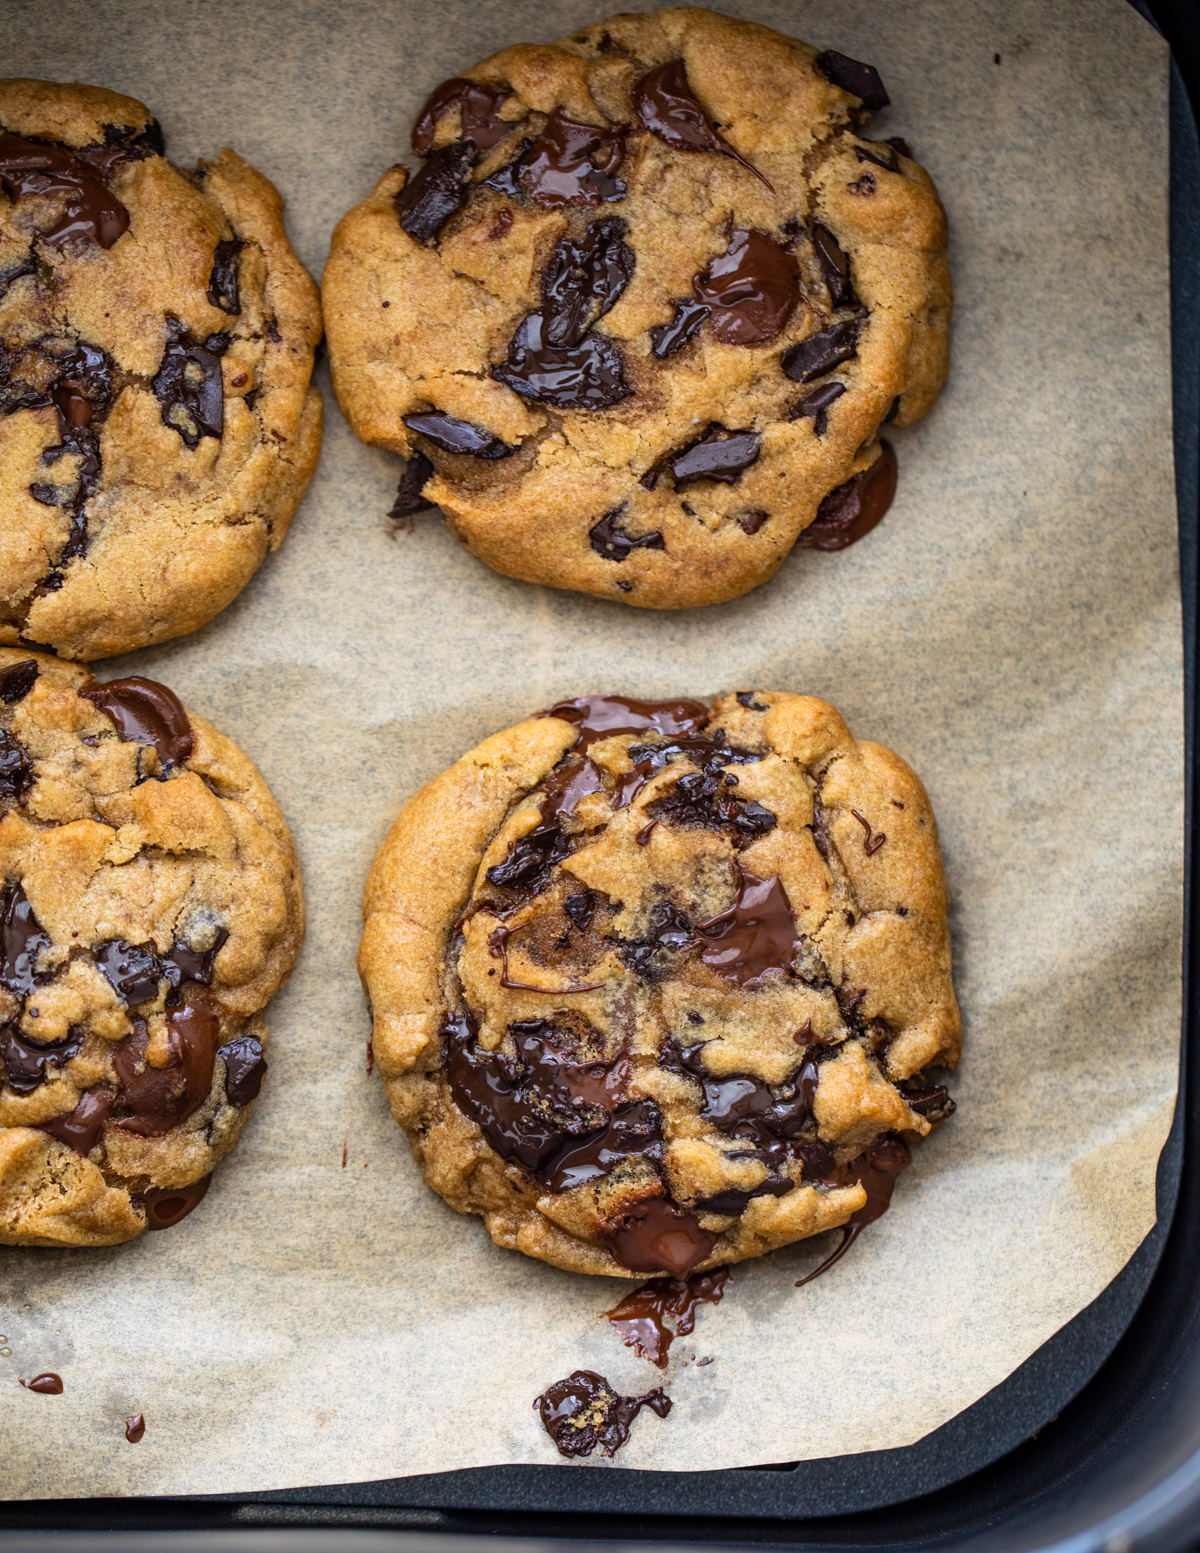 https://gimmedelicious.com/wp-content/uploads/2021/03/Air-Fryer-Chocolate-Chip-Cookies-9.jpg